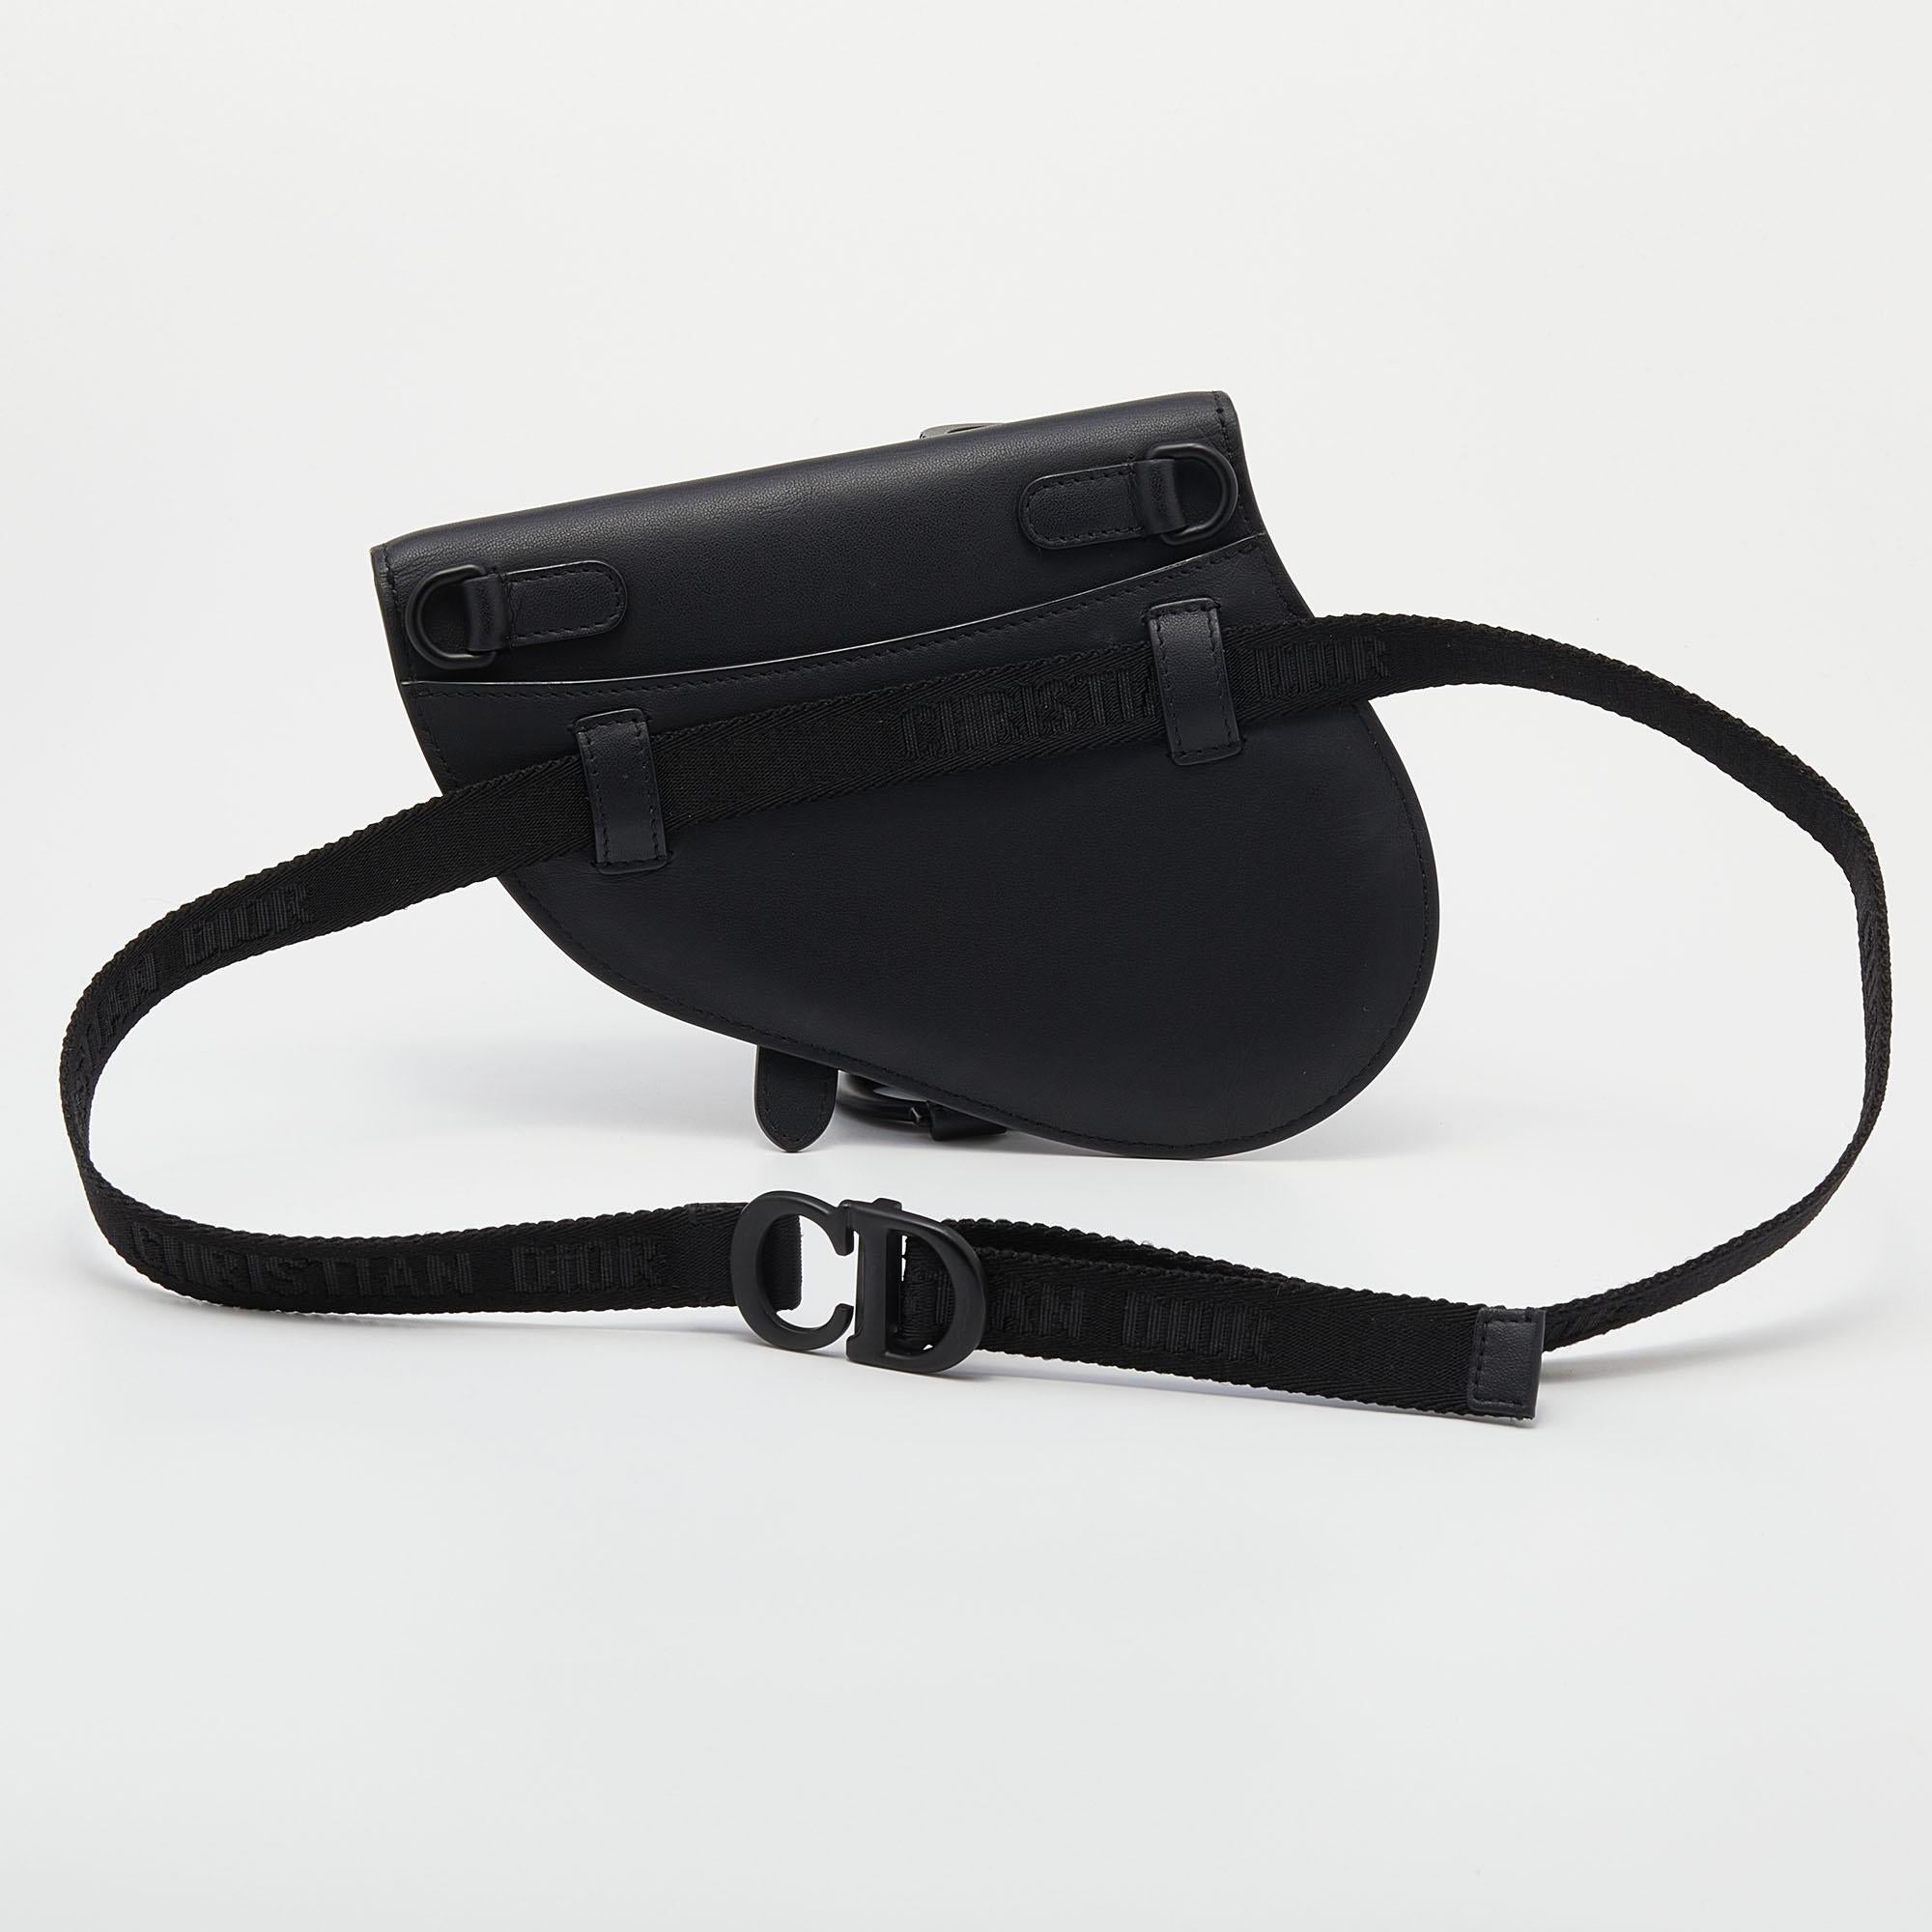 Owing to its uniquely-crafted silhouette and timeless elegance, the Saddle bag remains one of the most significant designs of the brand. This Saddle belt bag is carved using black leather, with a black-toned D charm hanging down the front. Its belt